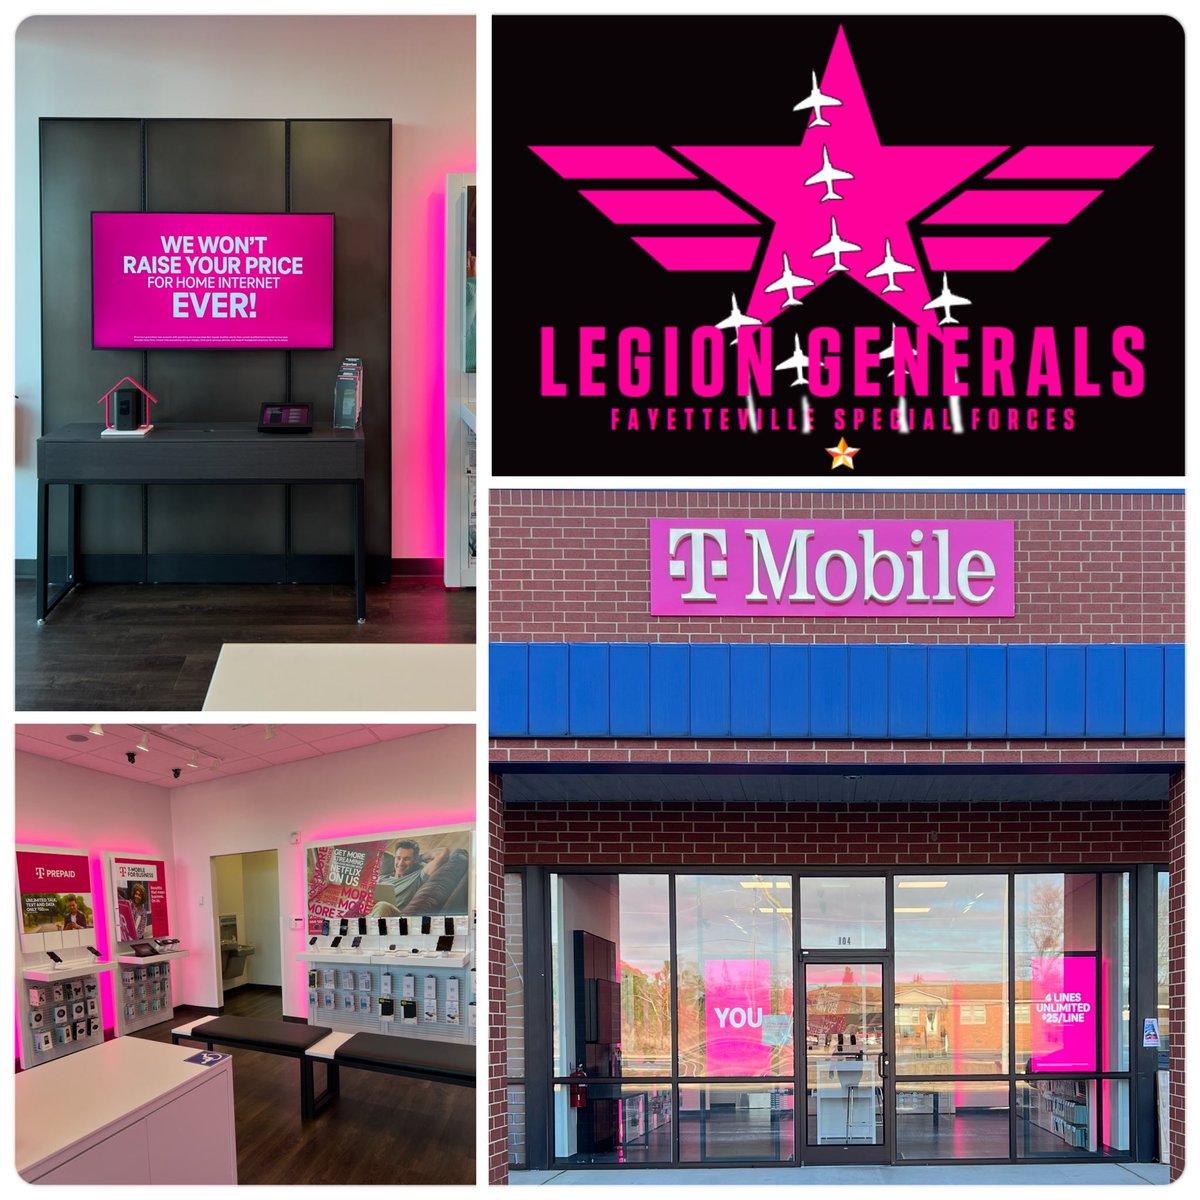 Congratulations to @bnjohnson78 on opening her new store! I look forward to the LEGION GENERALS doing BIG things!! #FaySpecialForces @MrDennisJones @ChappyCLT